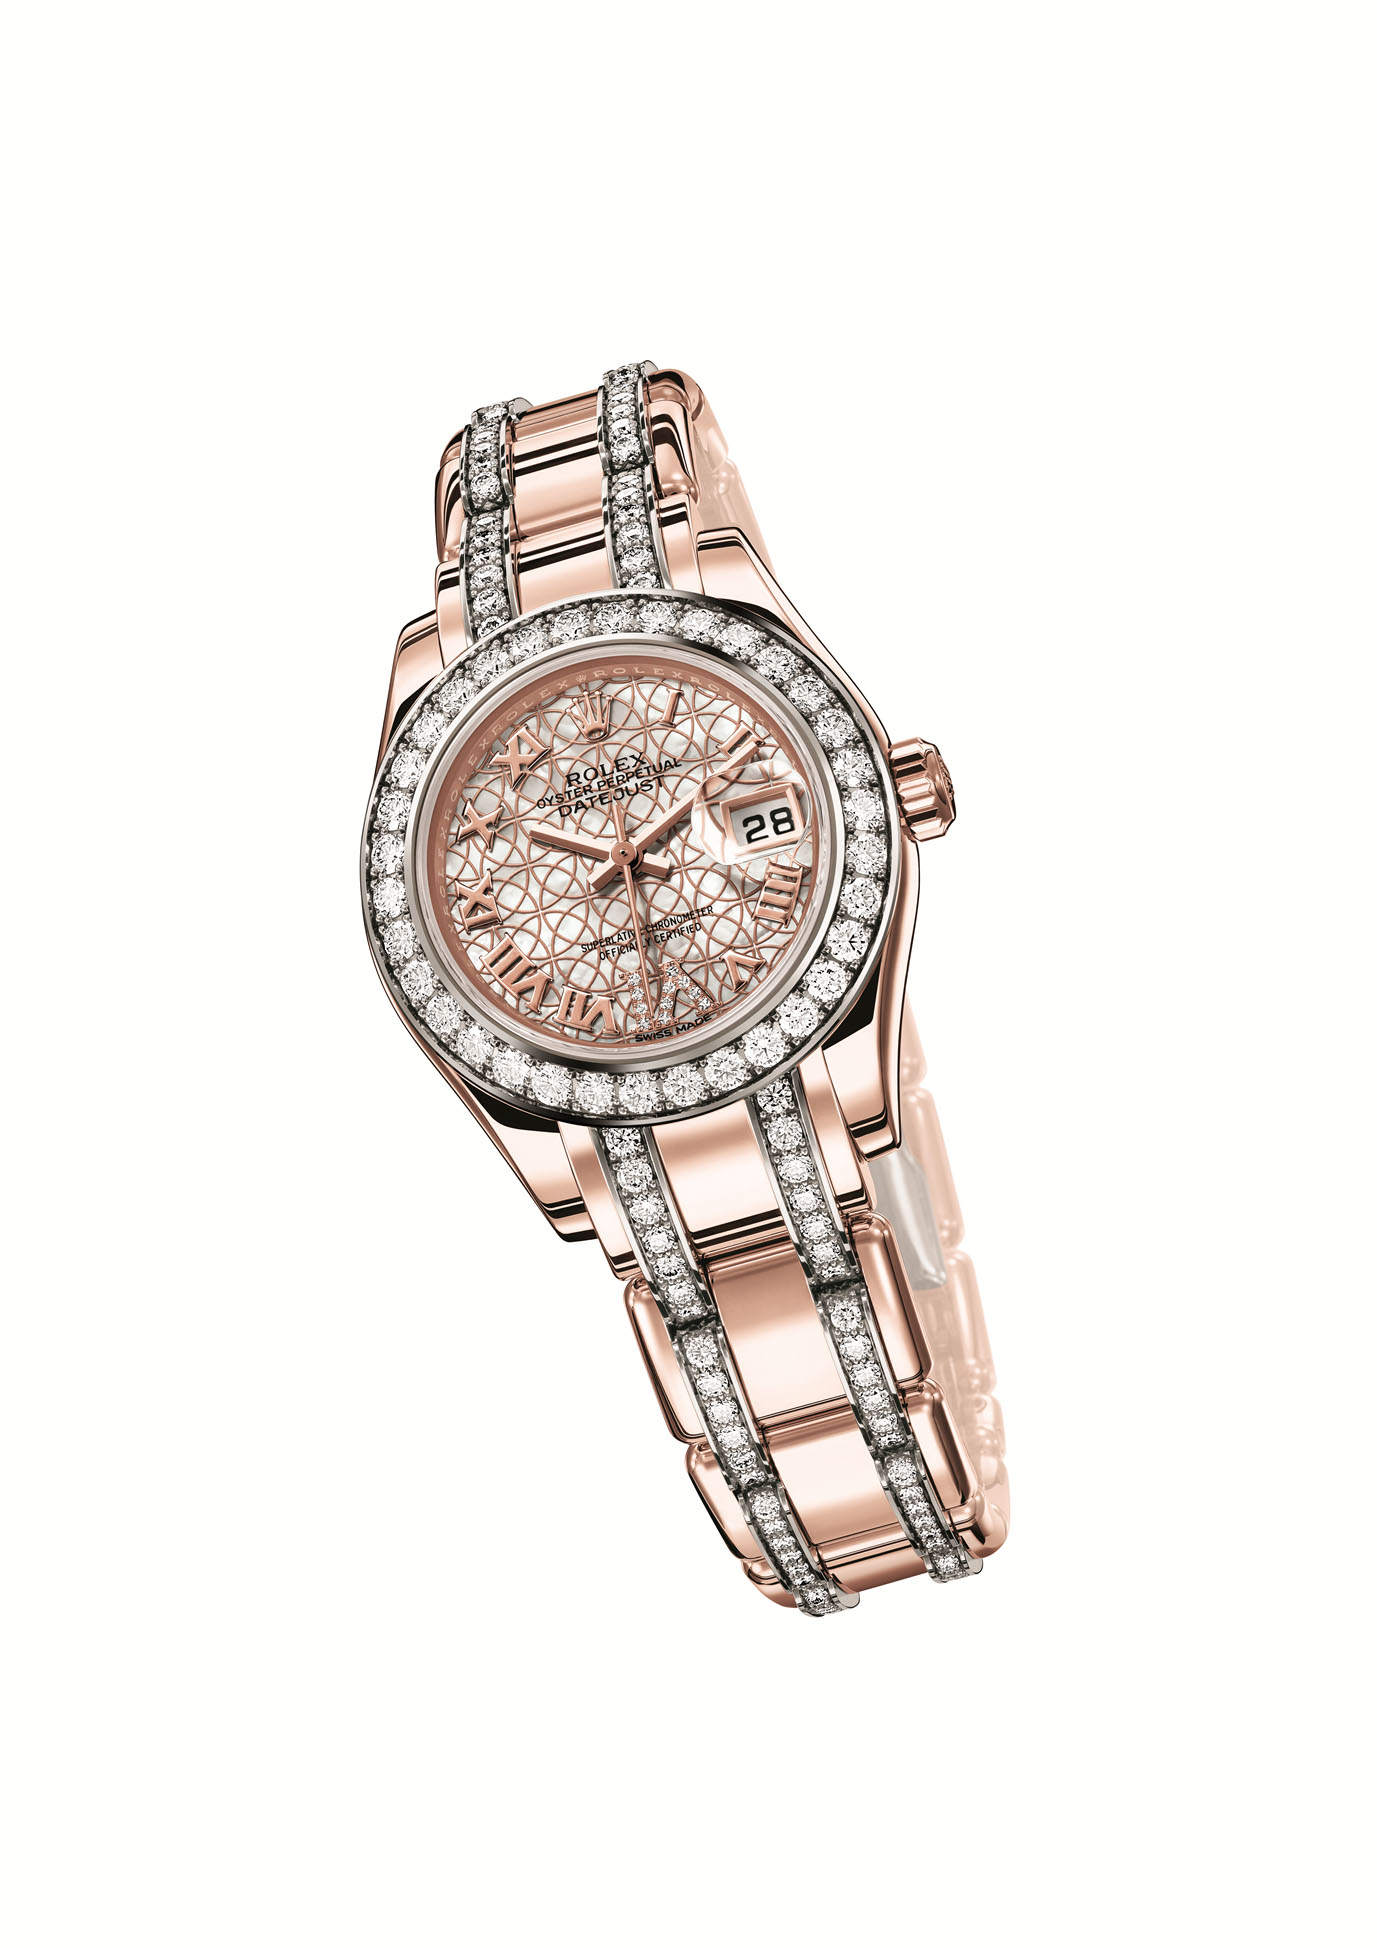 Datei:Rolex Lady-Datejust Pearlmaster Everose gold hell Ref 80285 ...